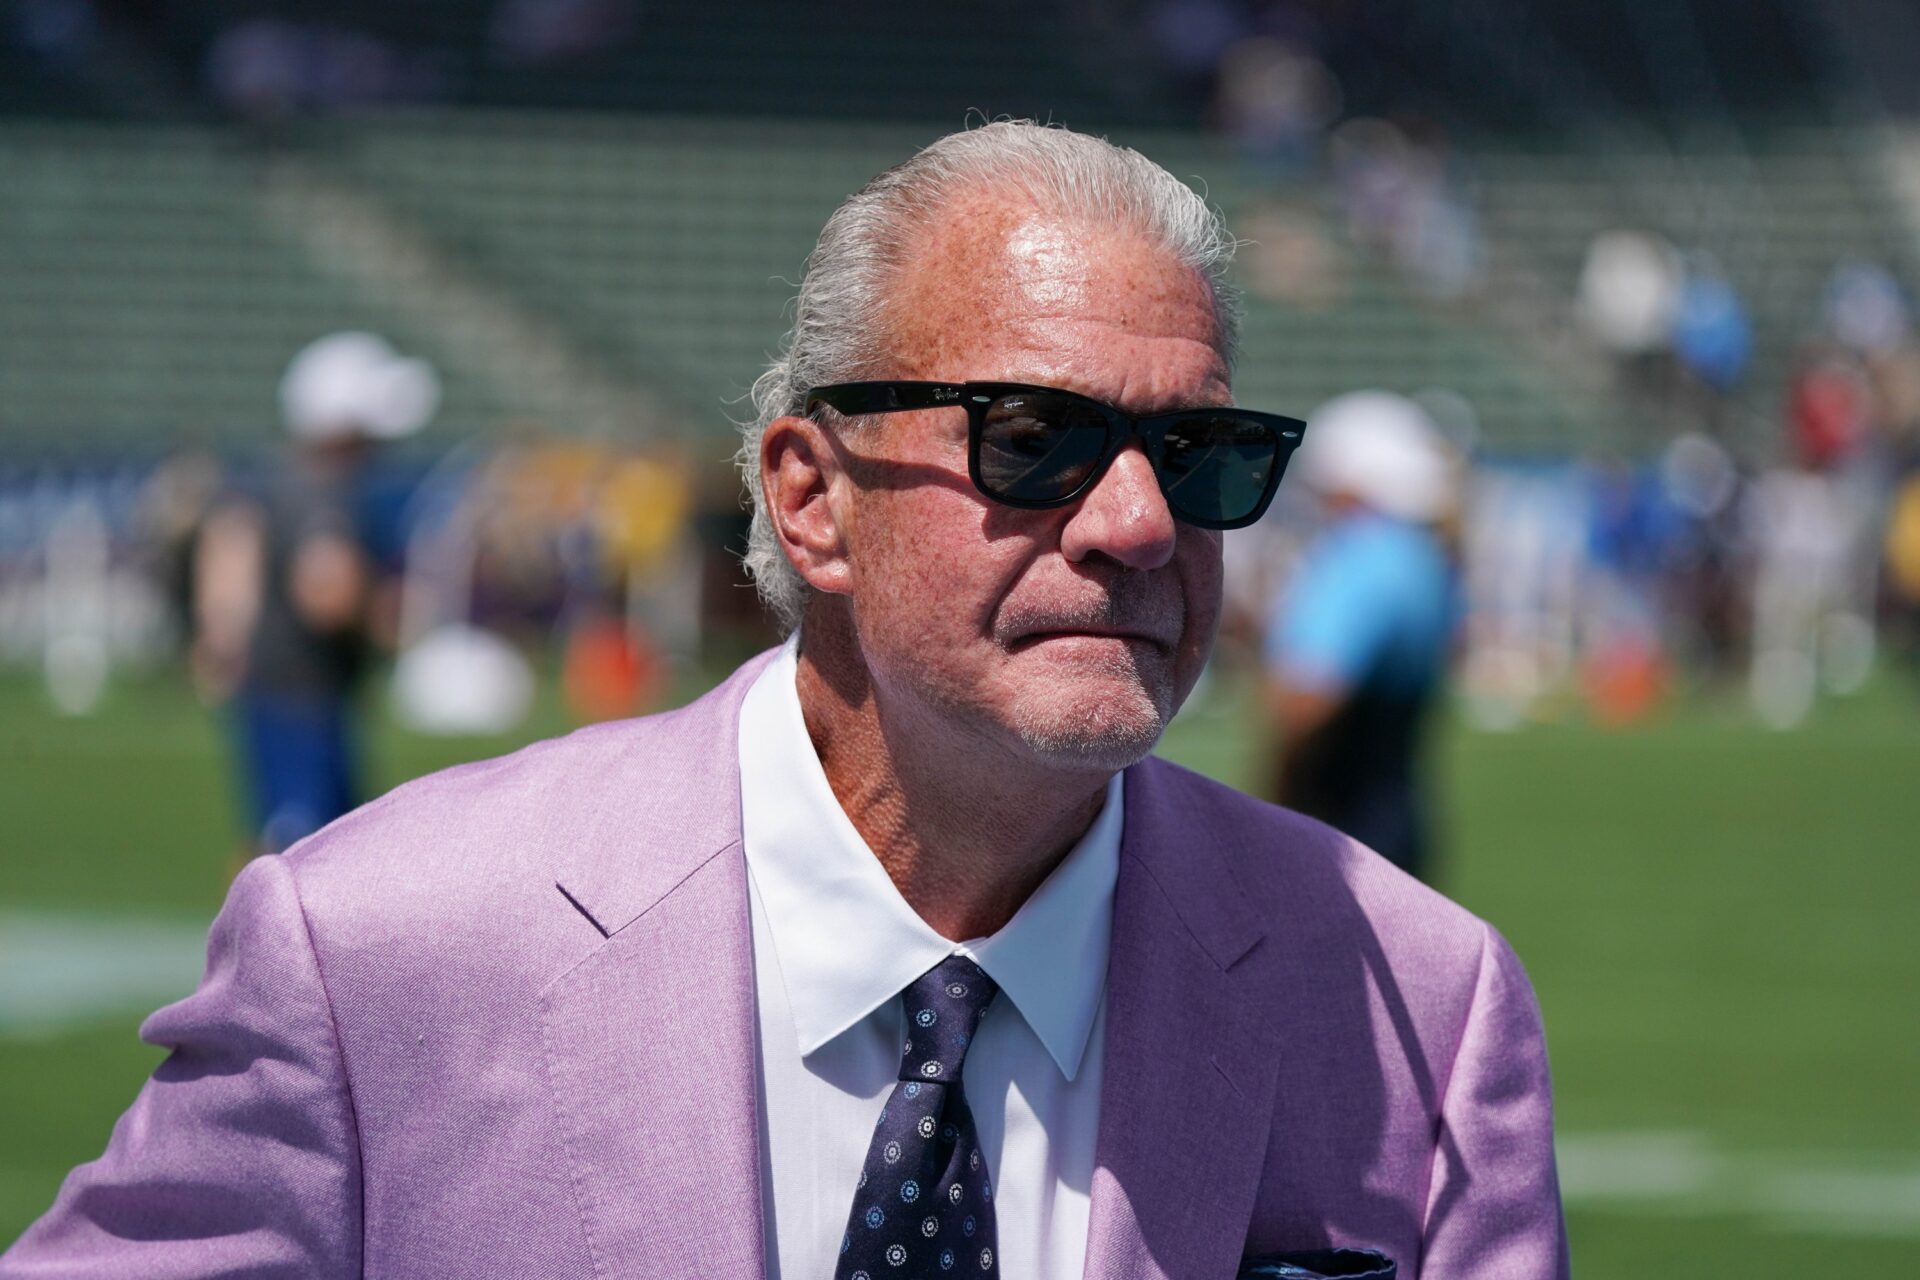 Indianapolis Colts owner Jim Irsay on the field prior to the game against the Los Angeles Chargers.